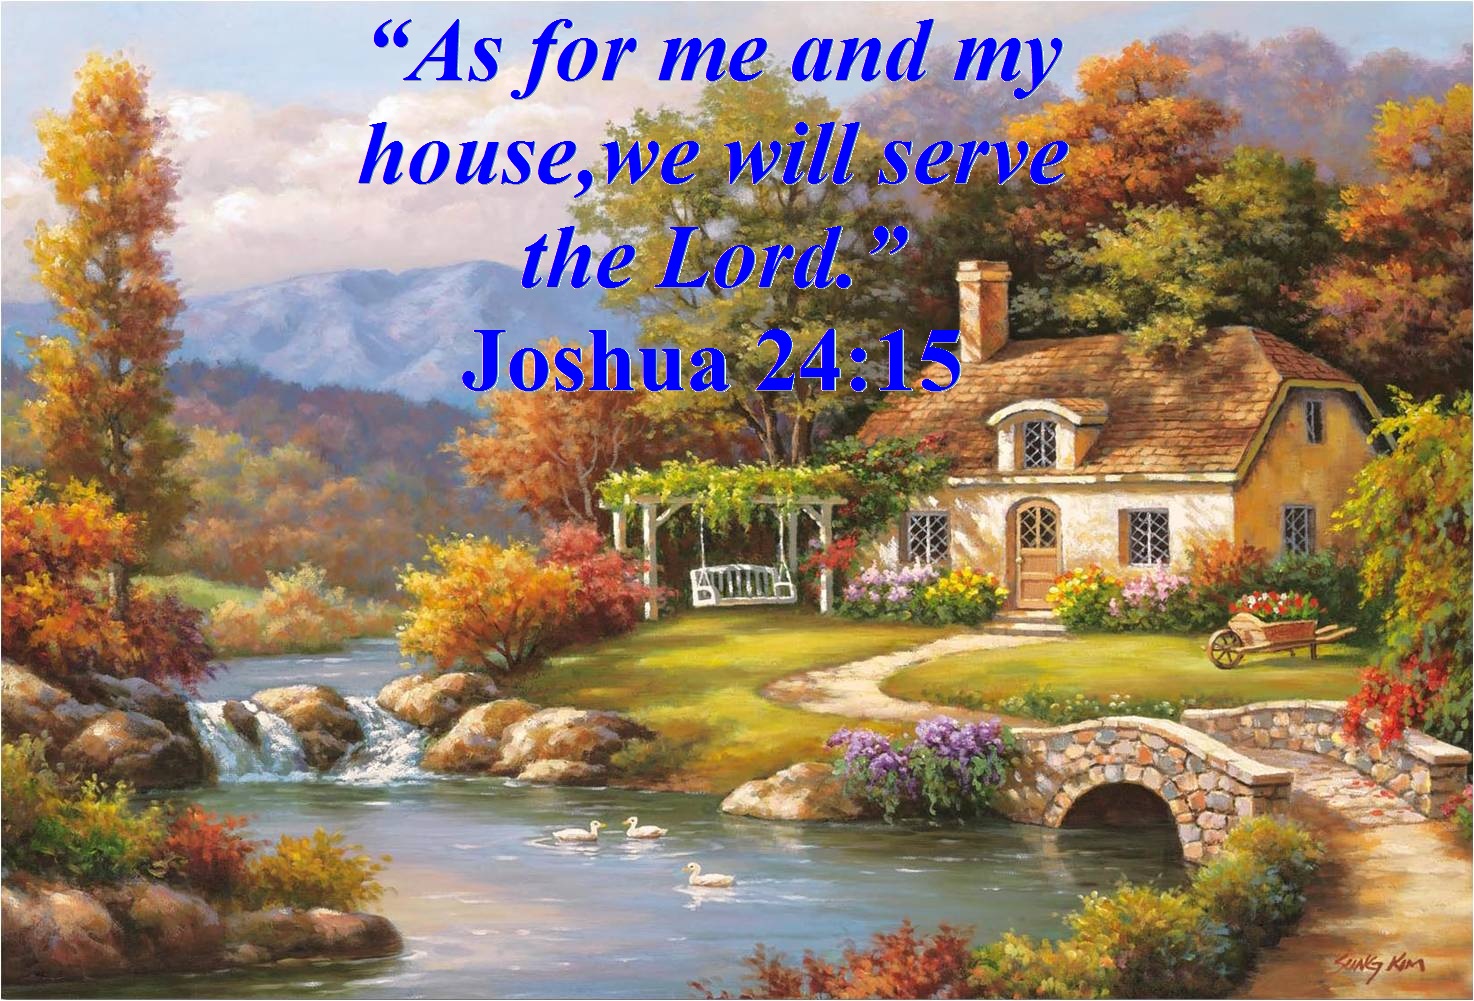 as-for-me-and-my-house-we-will-serve-the-lord-joshua-24-15-mission-venture-ministries